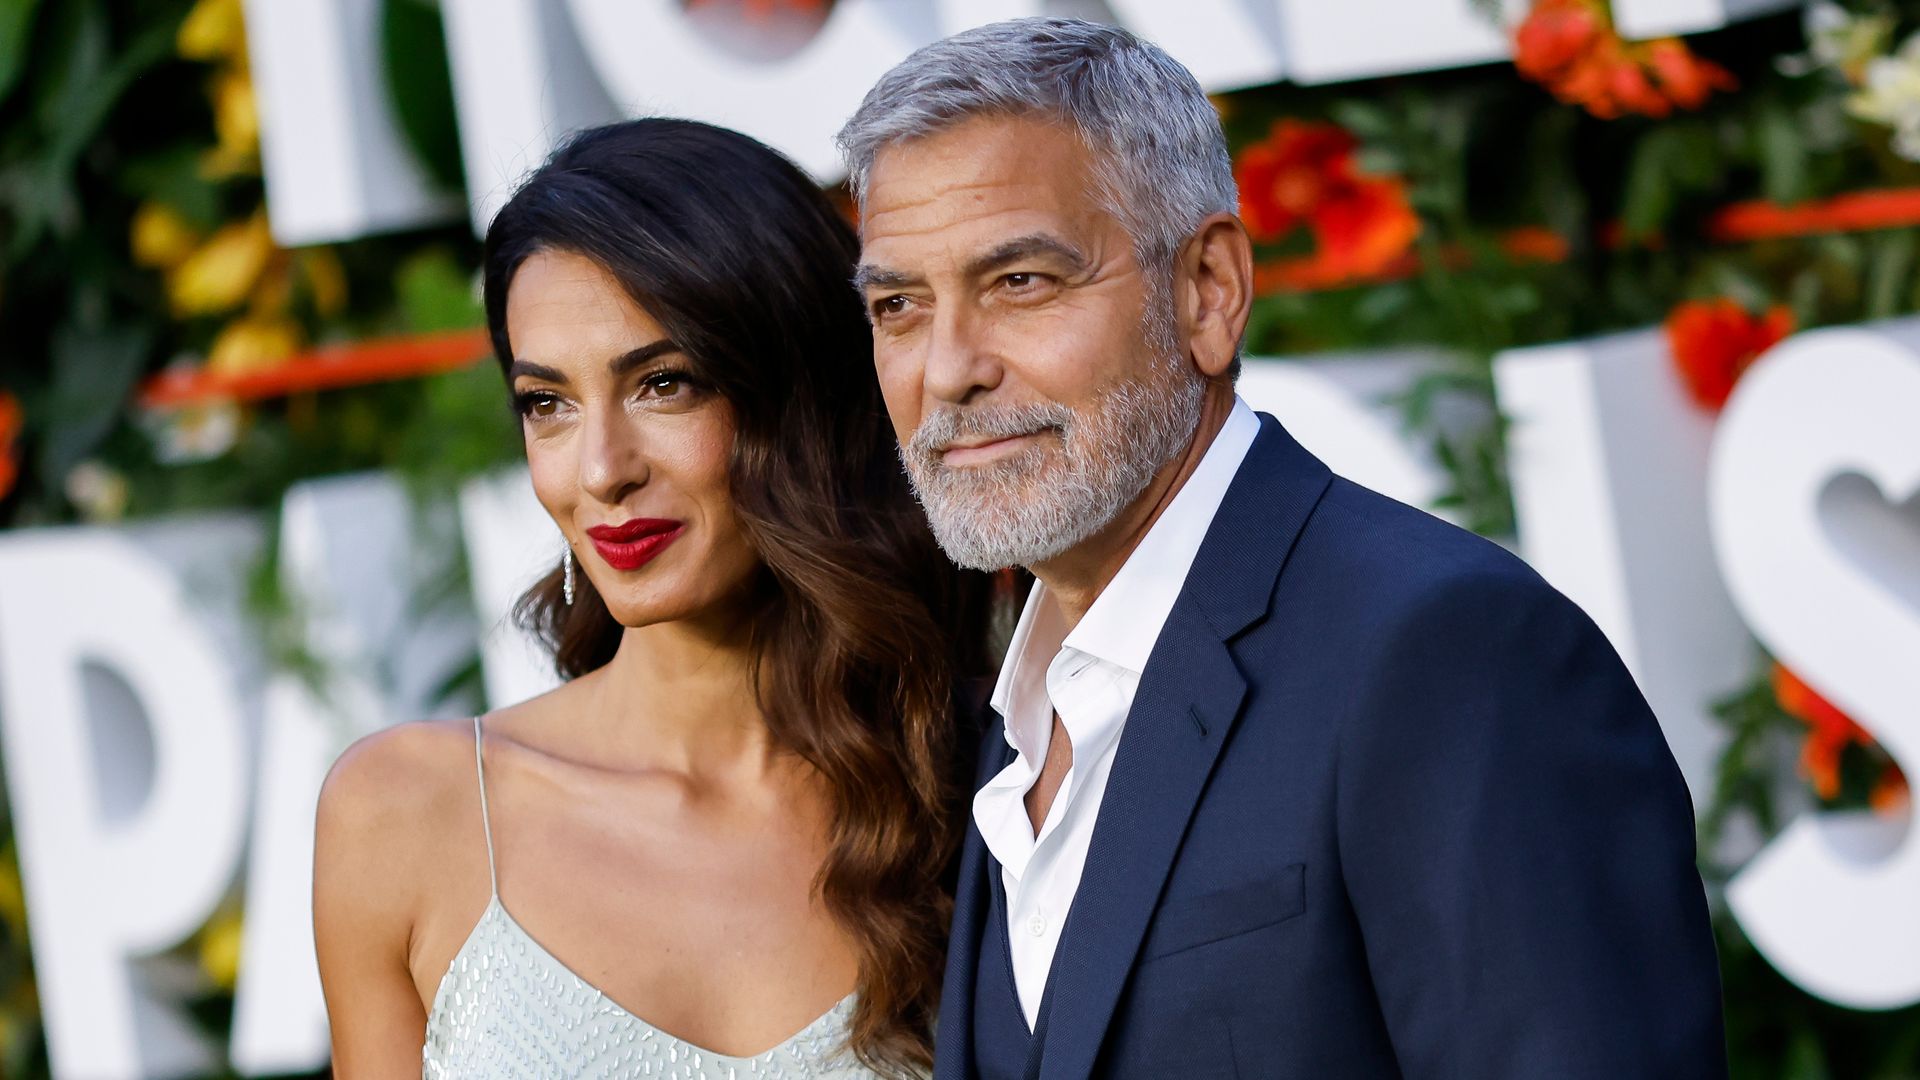 Amal Clooney and George Clooney attend the World Premiere of "Ticket to Paradise" at Odeon Luxe Leicester Square on September 07, 2022 in London